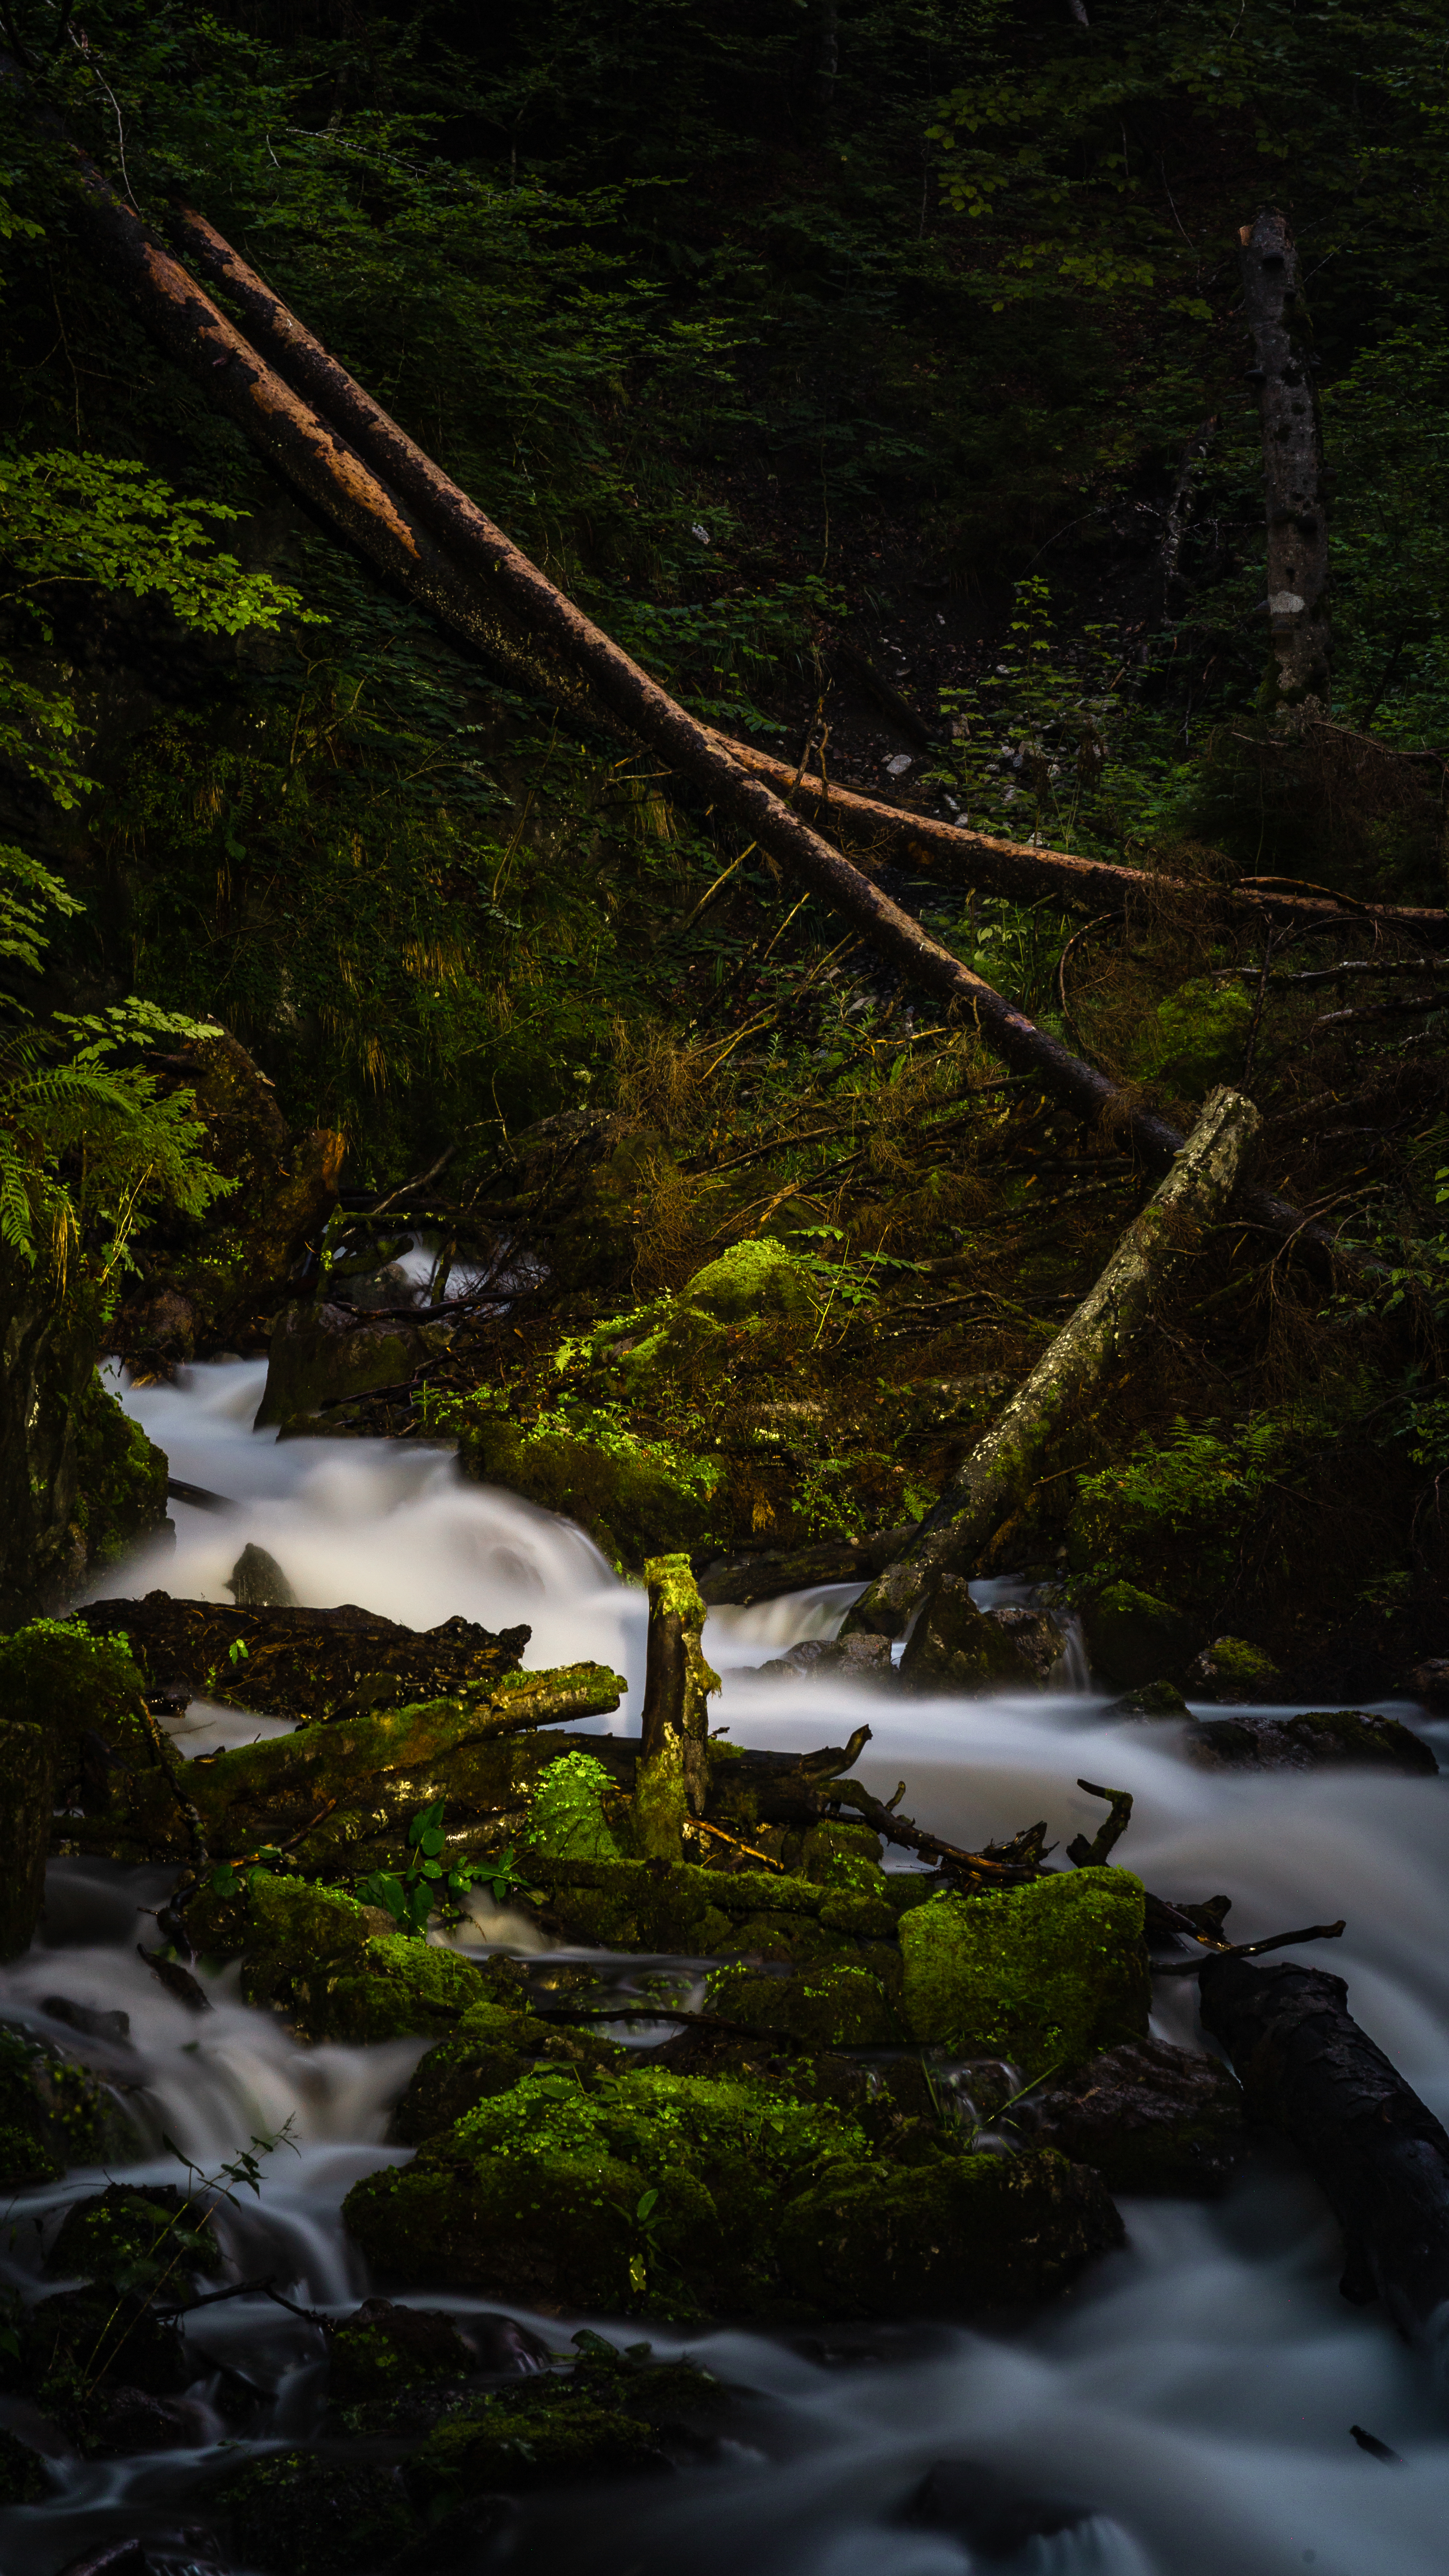 moss, nature, rivers, stones, branches, flow, stream